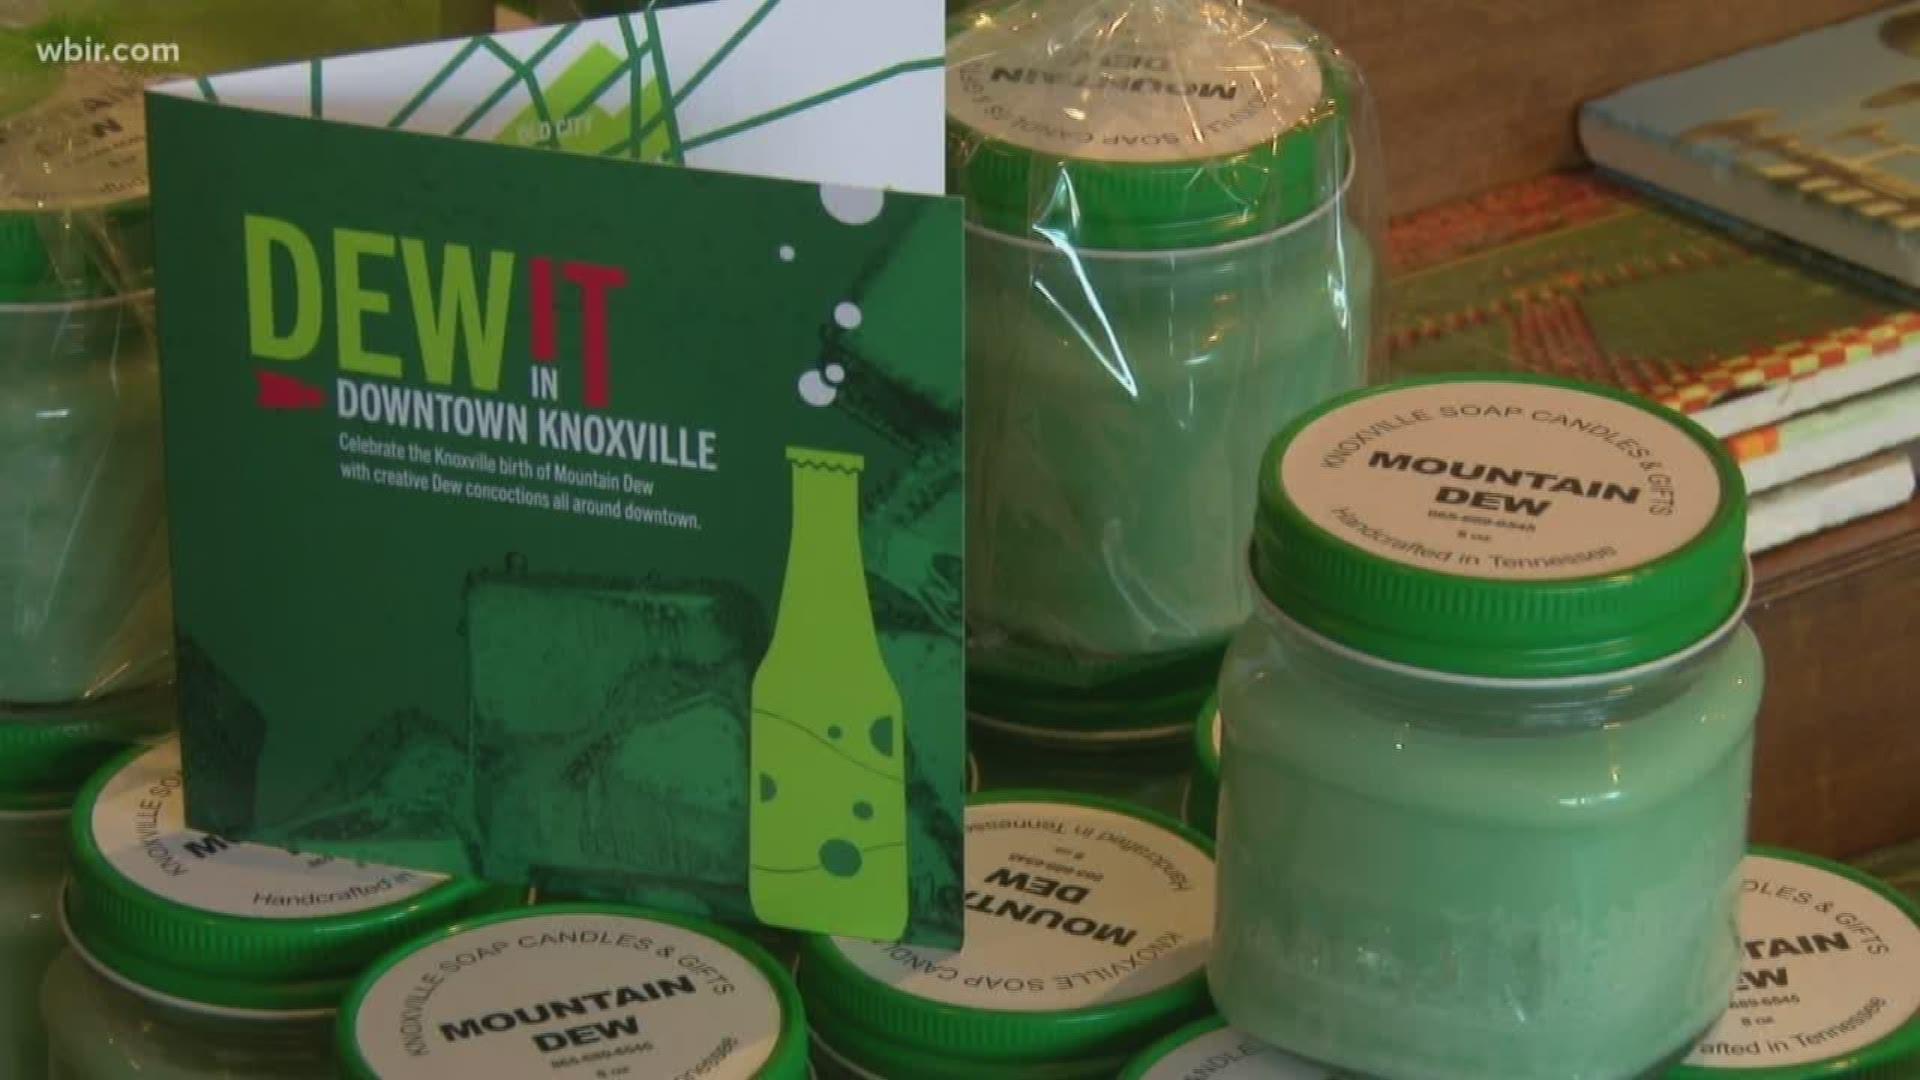 Mountain Dew got its start right here in Knoxville as a mixer with moonshine.